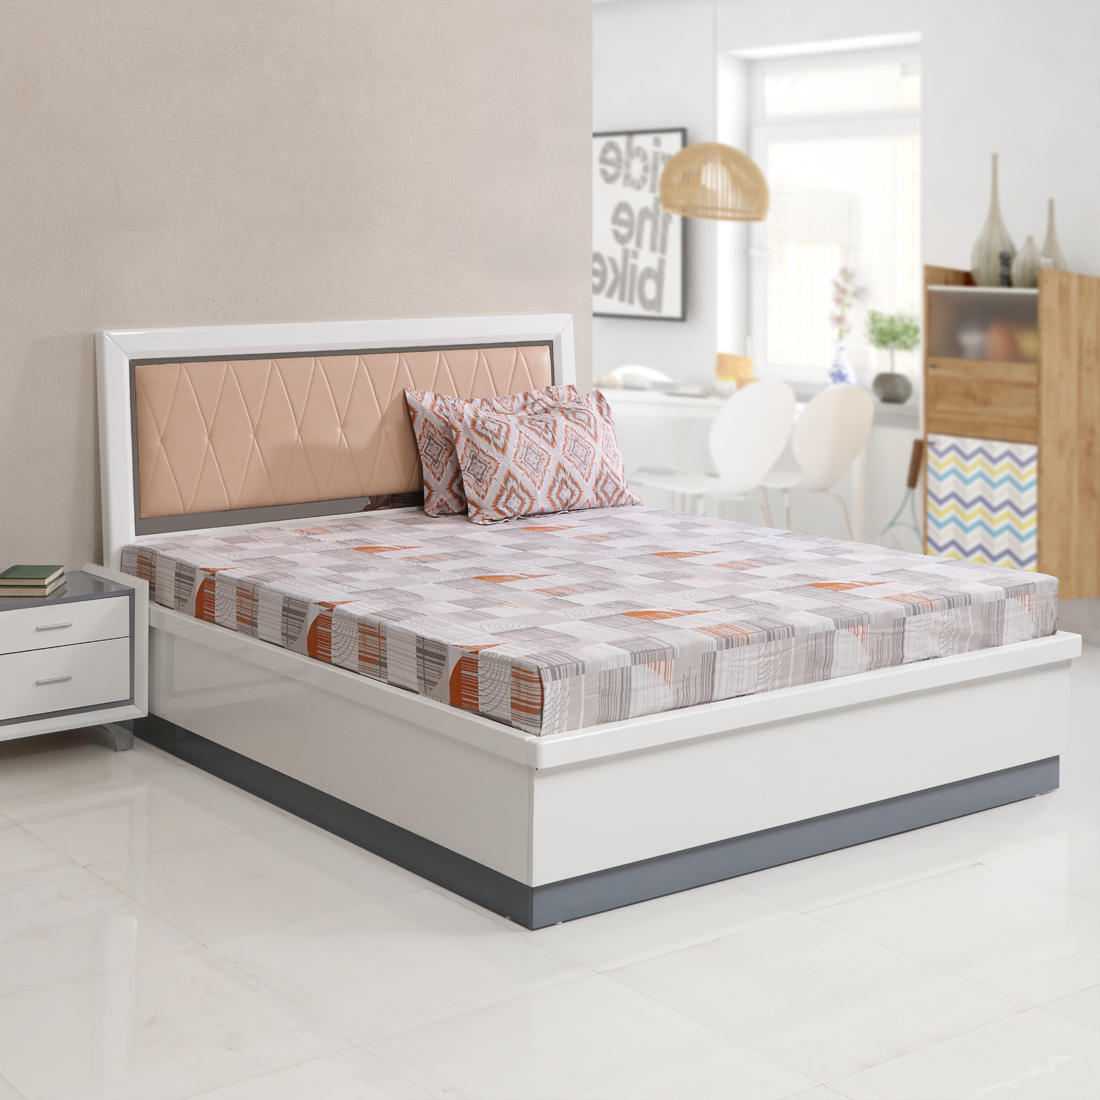 Boston New Engineerwood Queen Bed, Bed Frame With Storage White Queen